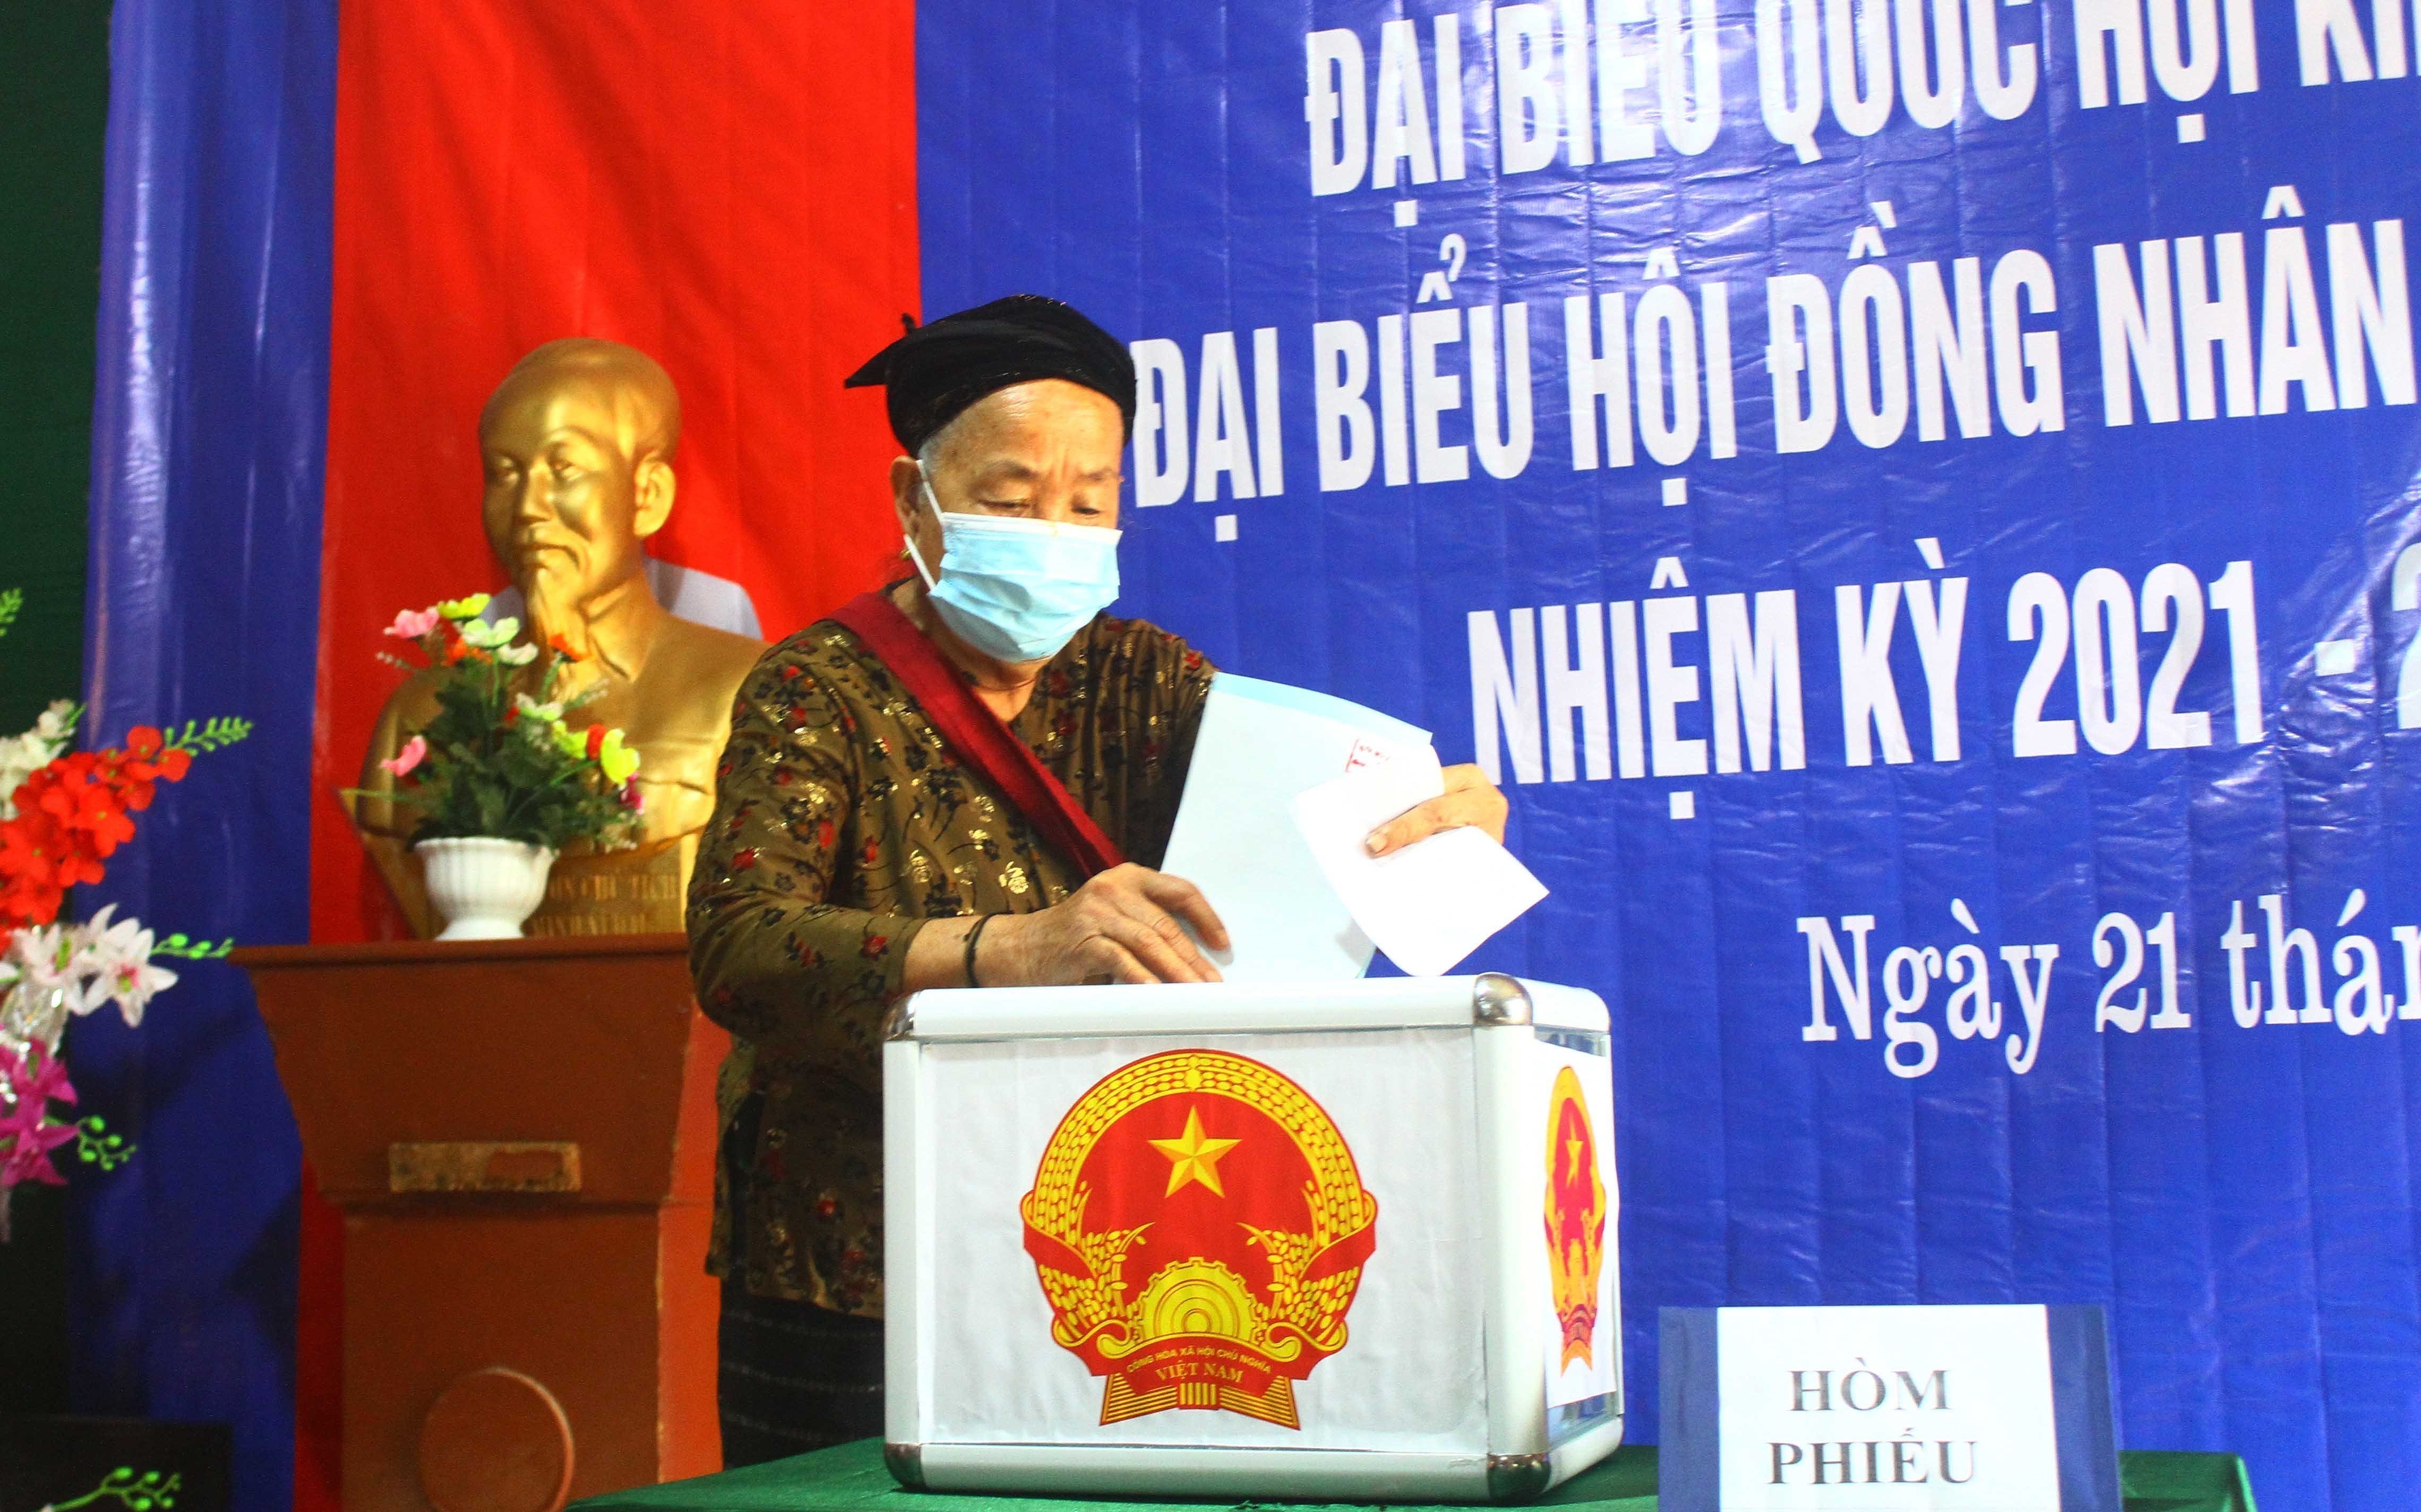 Ethnic minority groups in Nghe An cast ballots early hinh anh 6